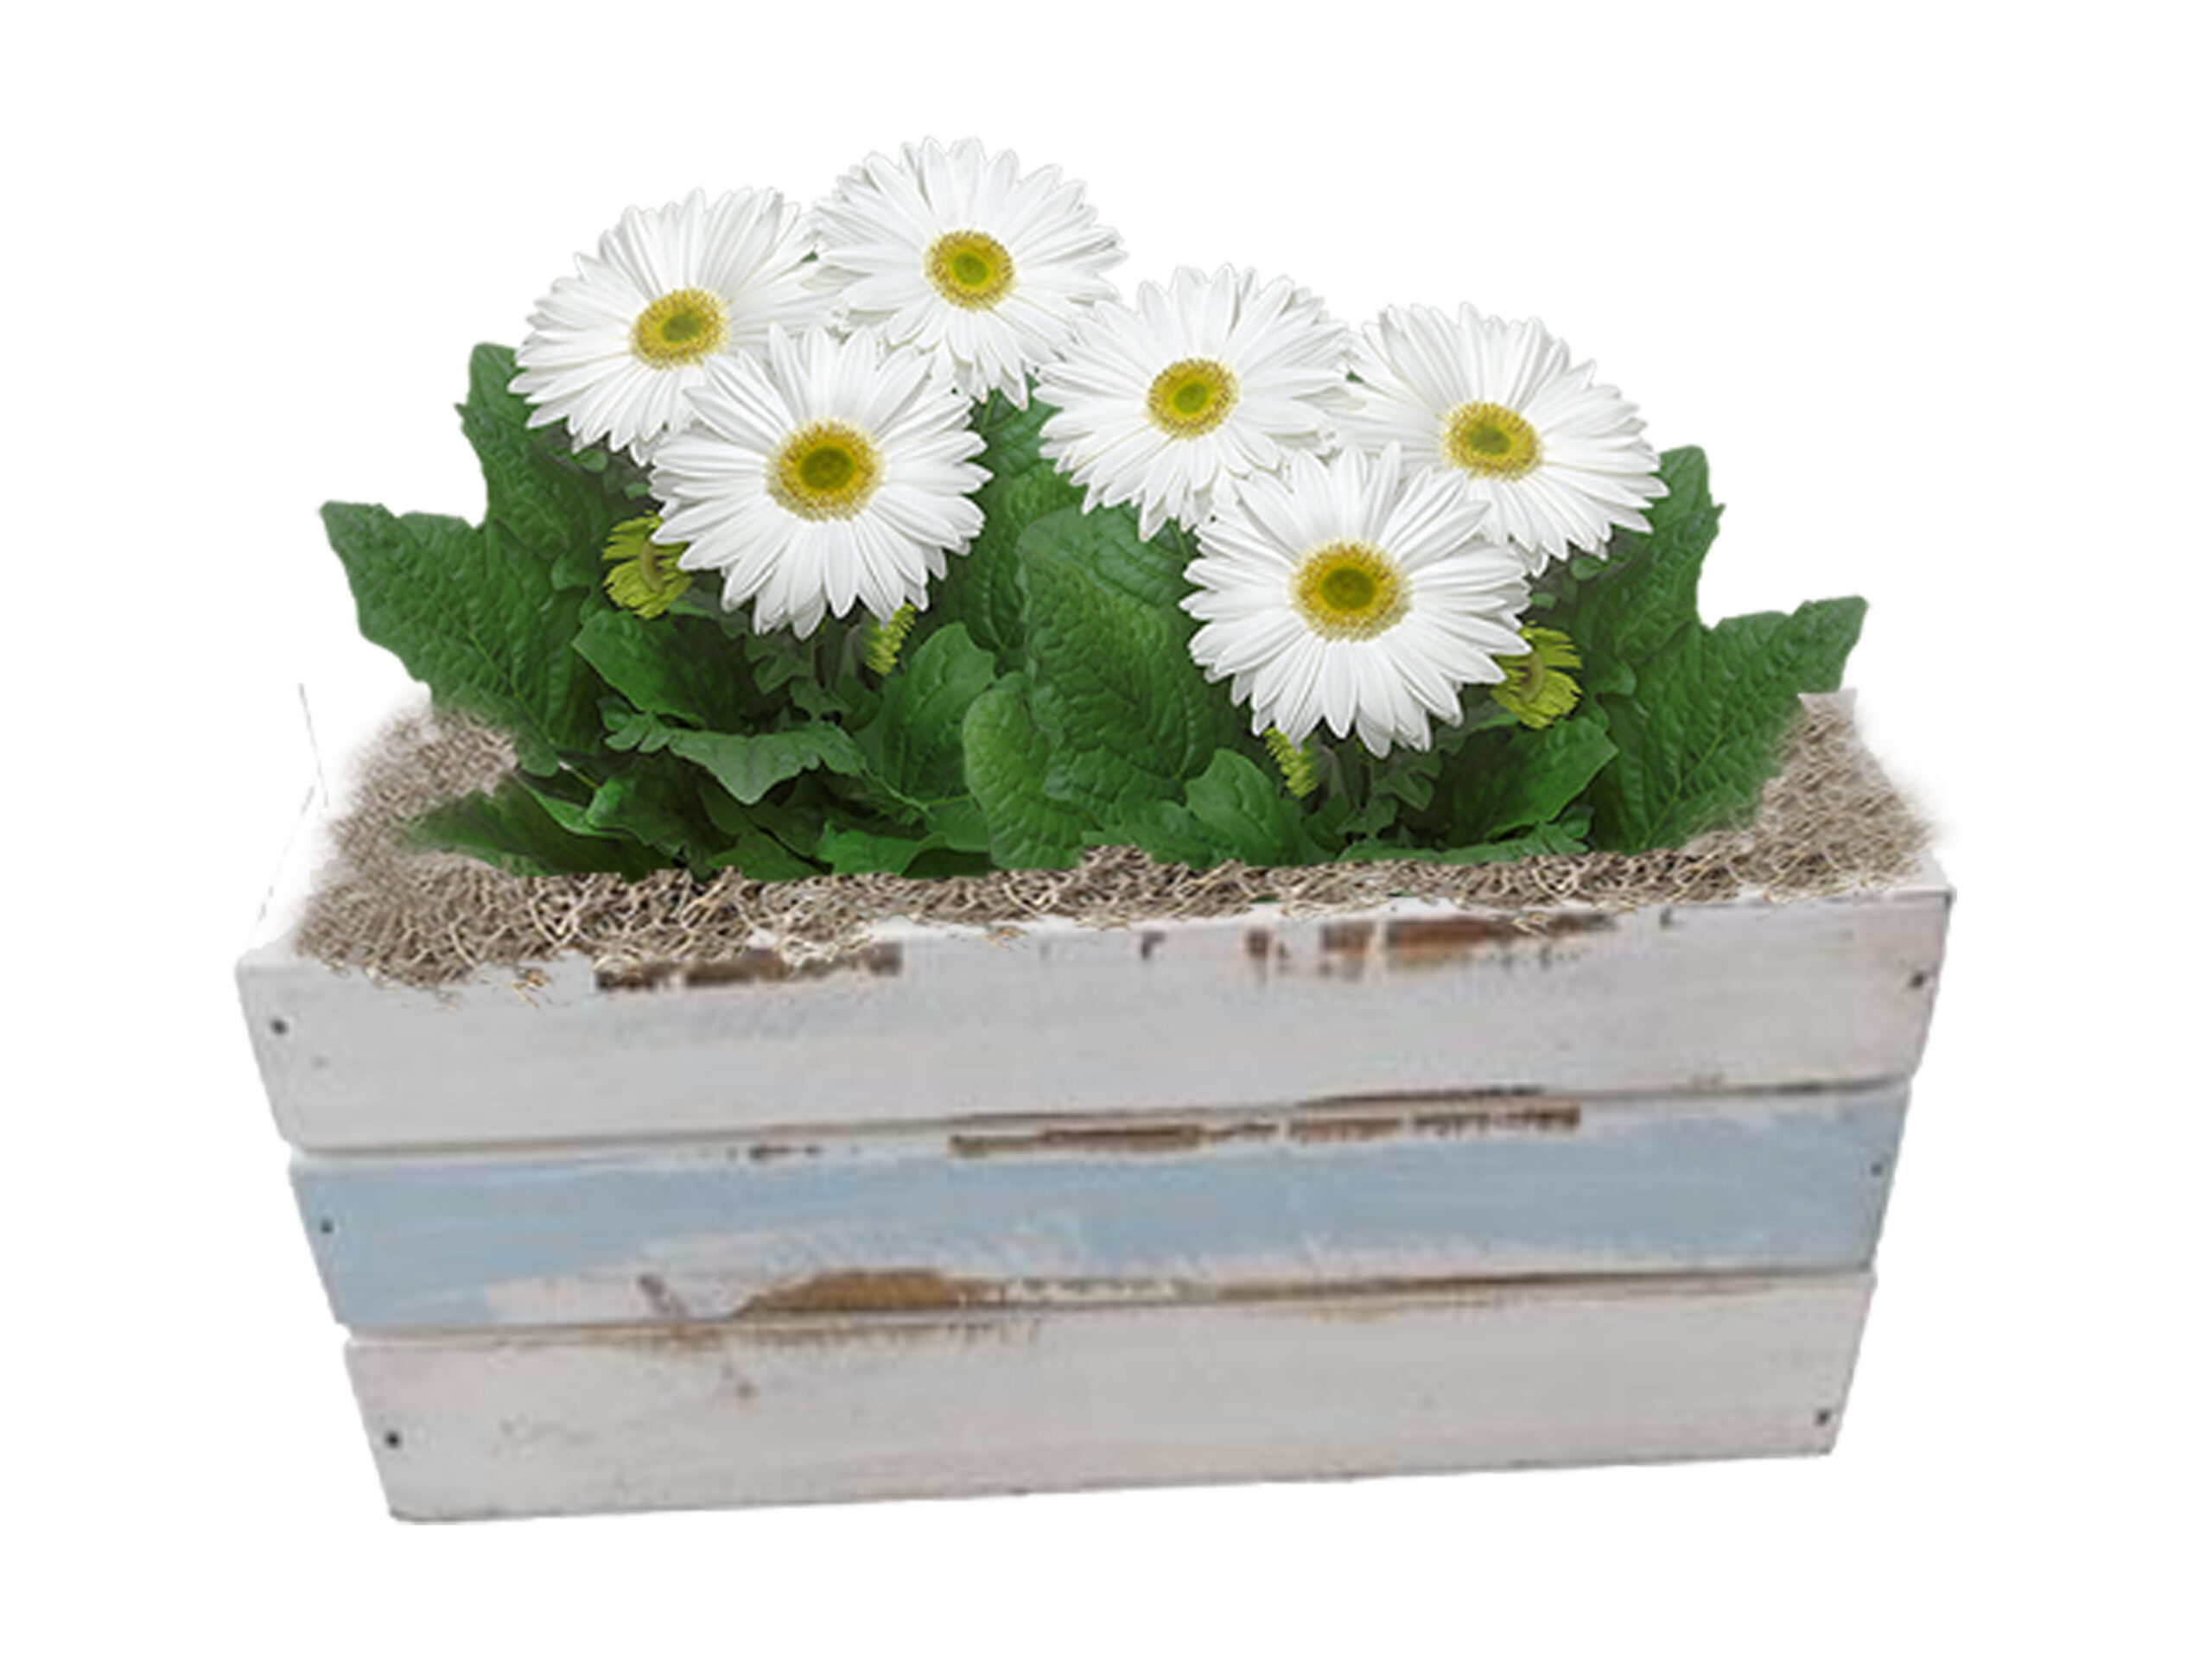 white gerbs in seaside wooden container